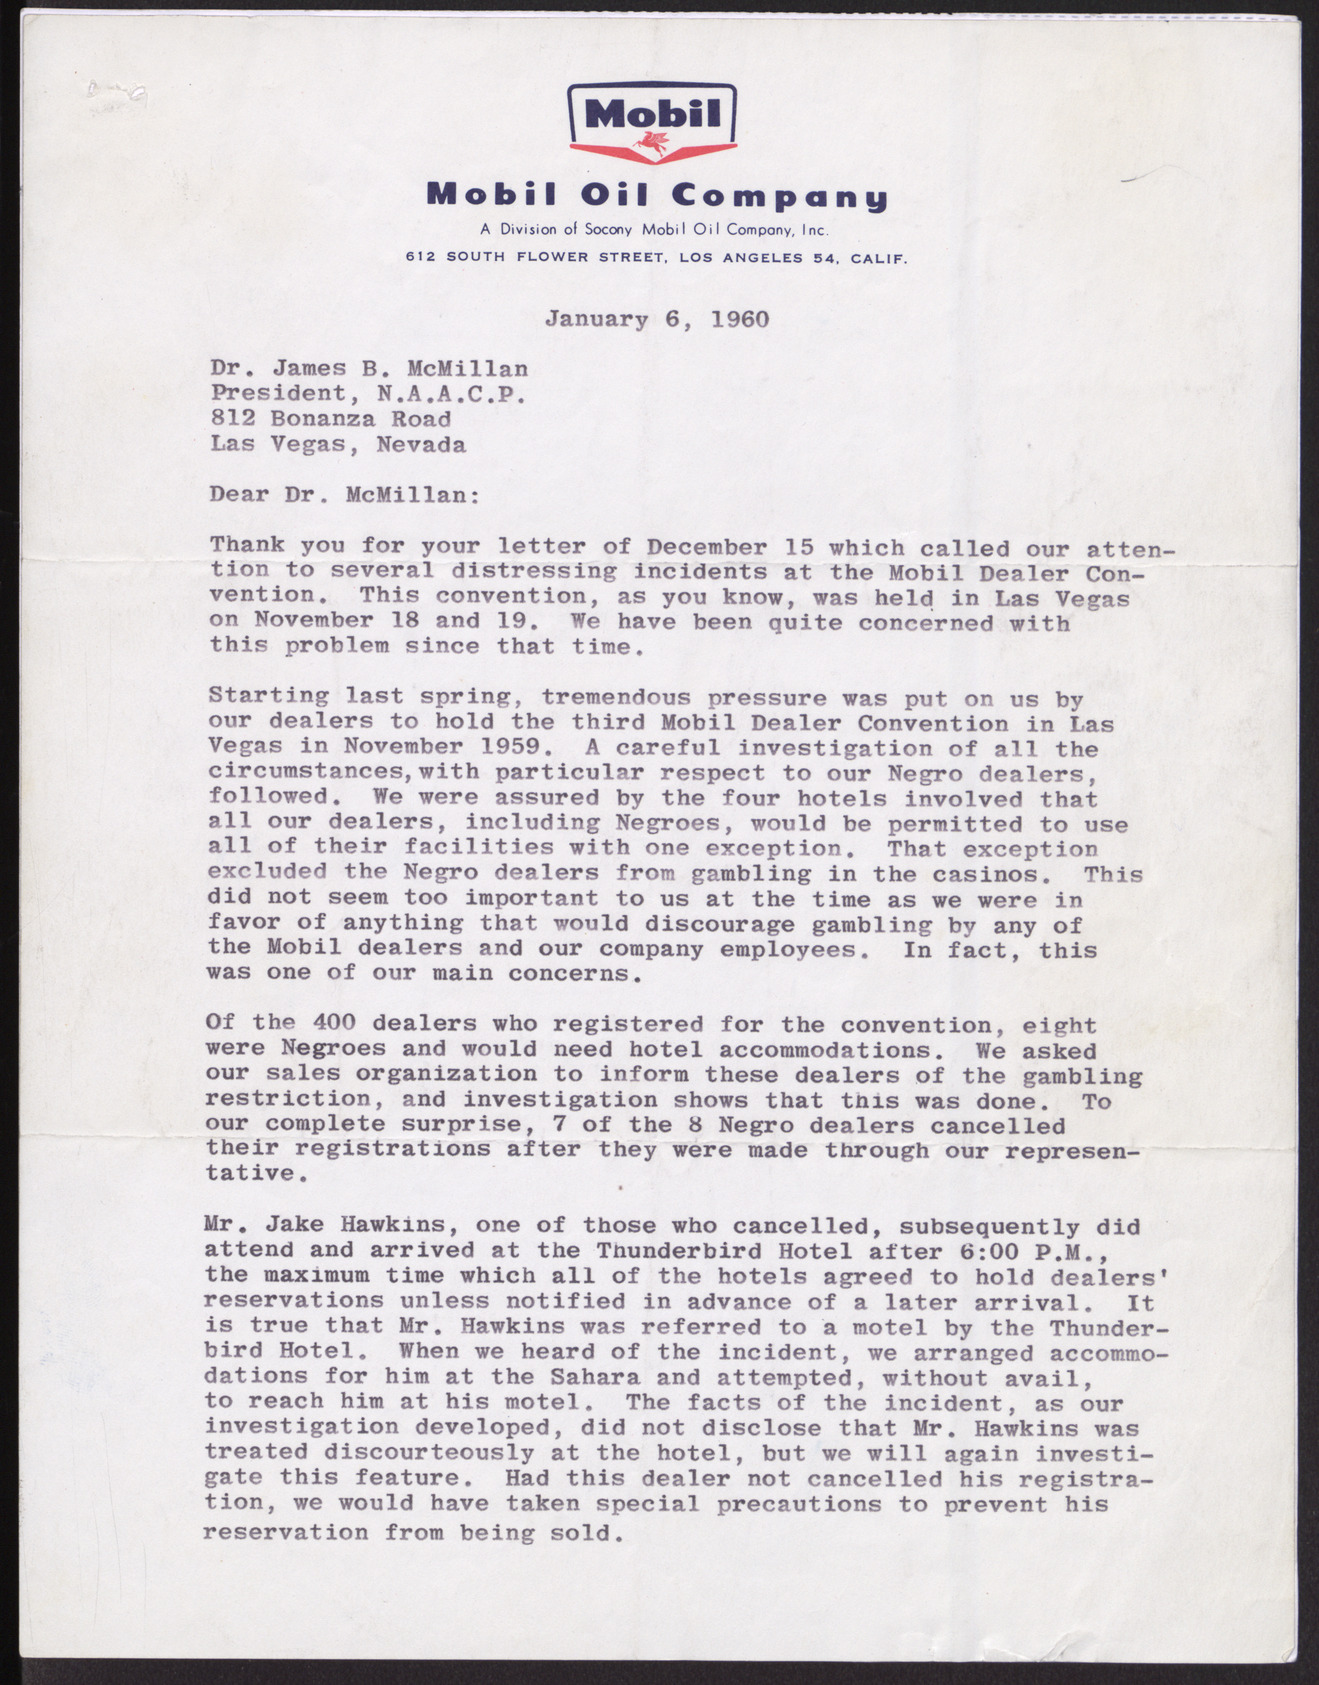 Letter to James B. McMillan from E. E. Winters, January 6, 1960